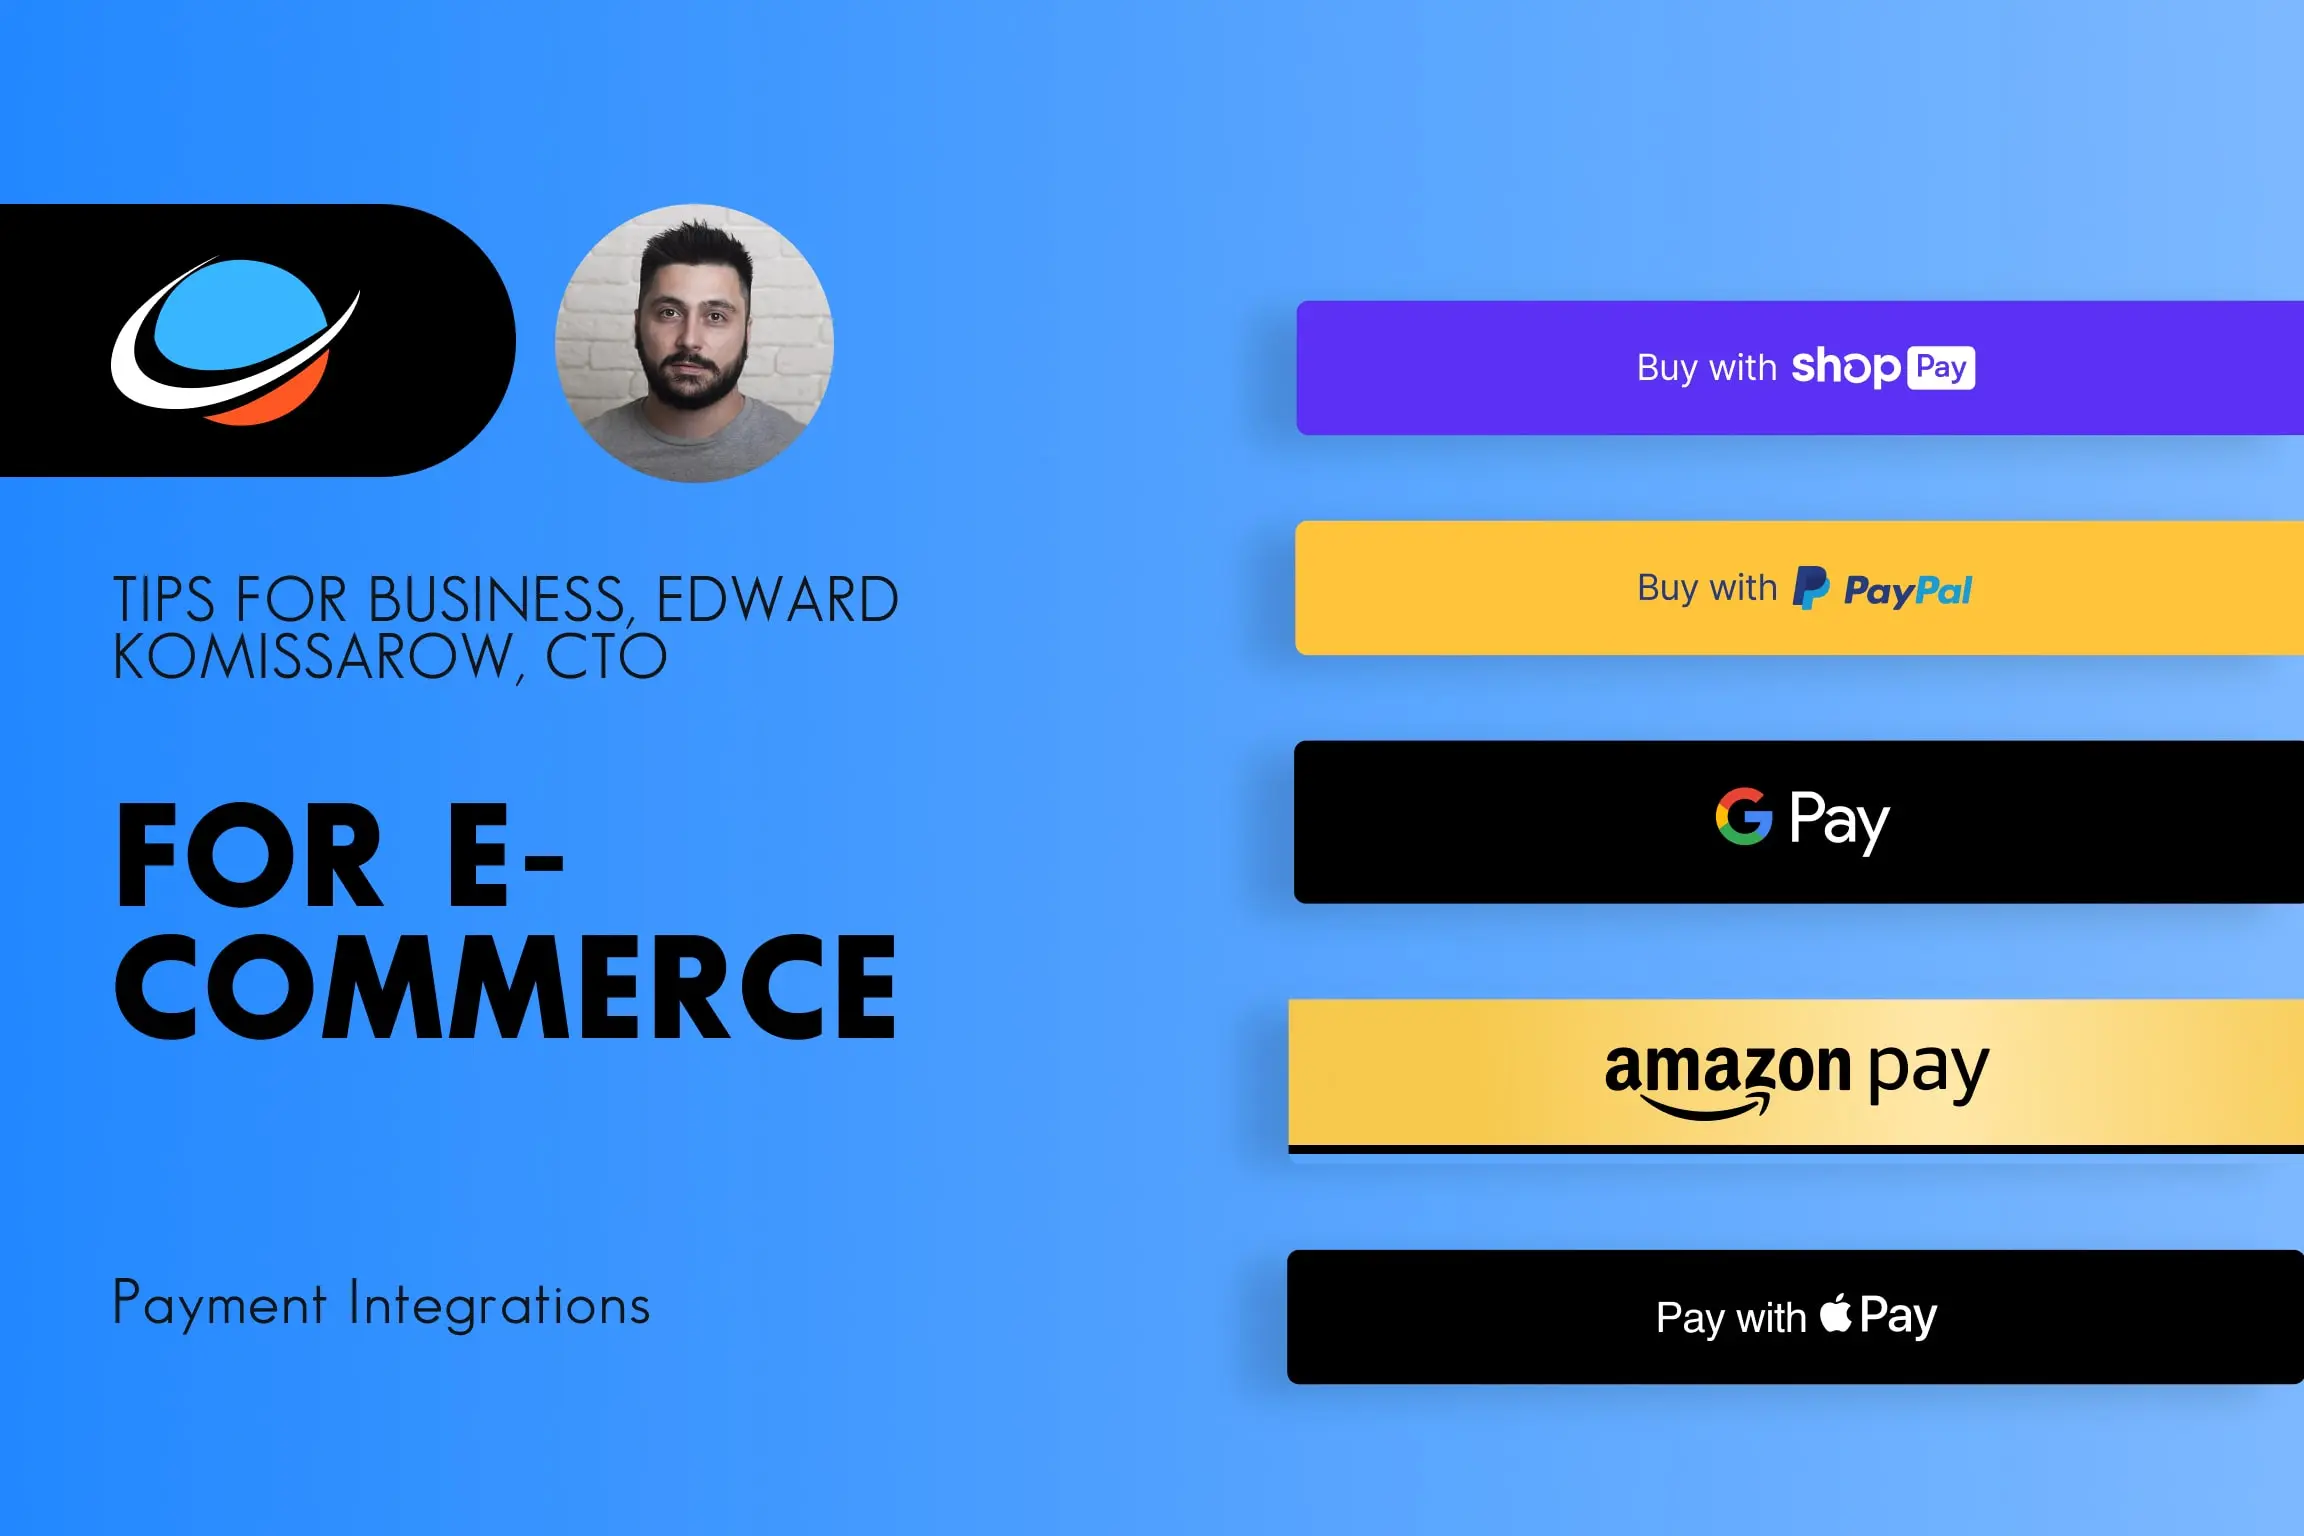 Article: Simplifying Payment Provider Integration for Your E-commerce Project